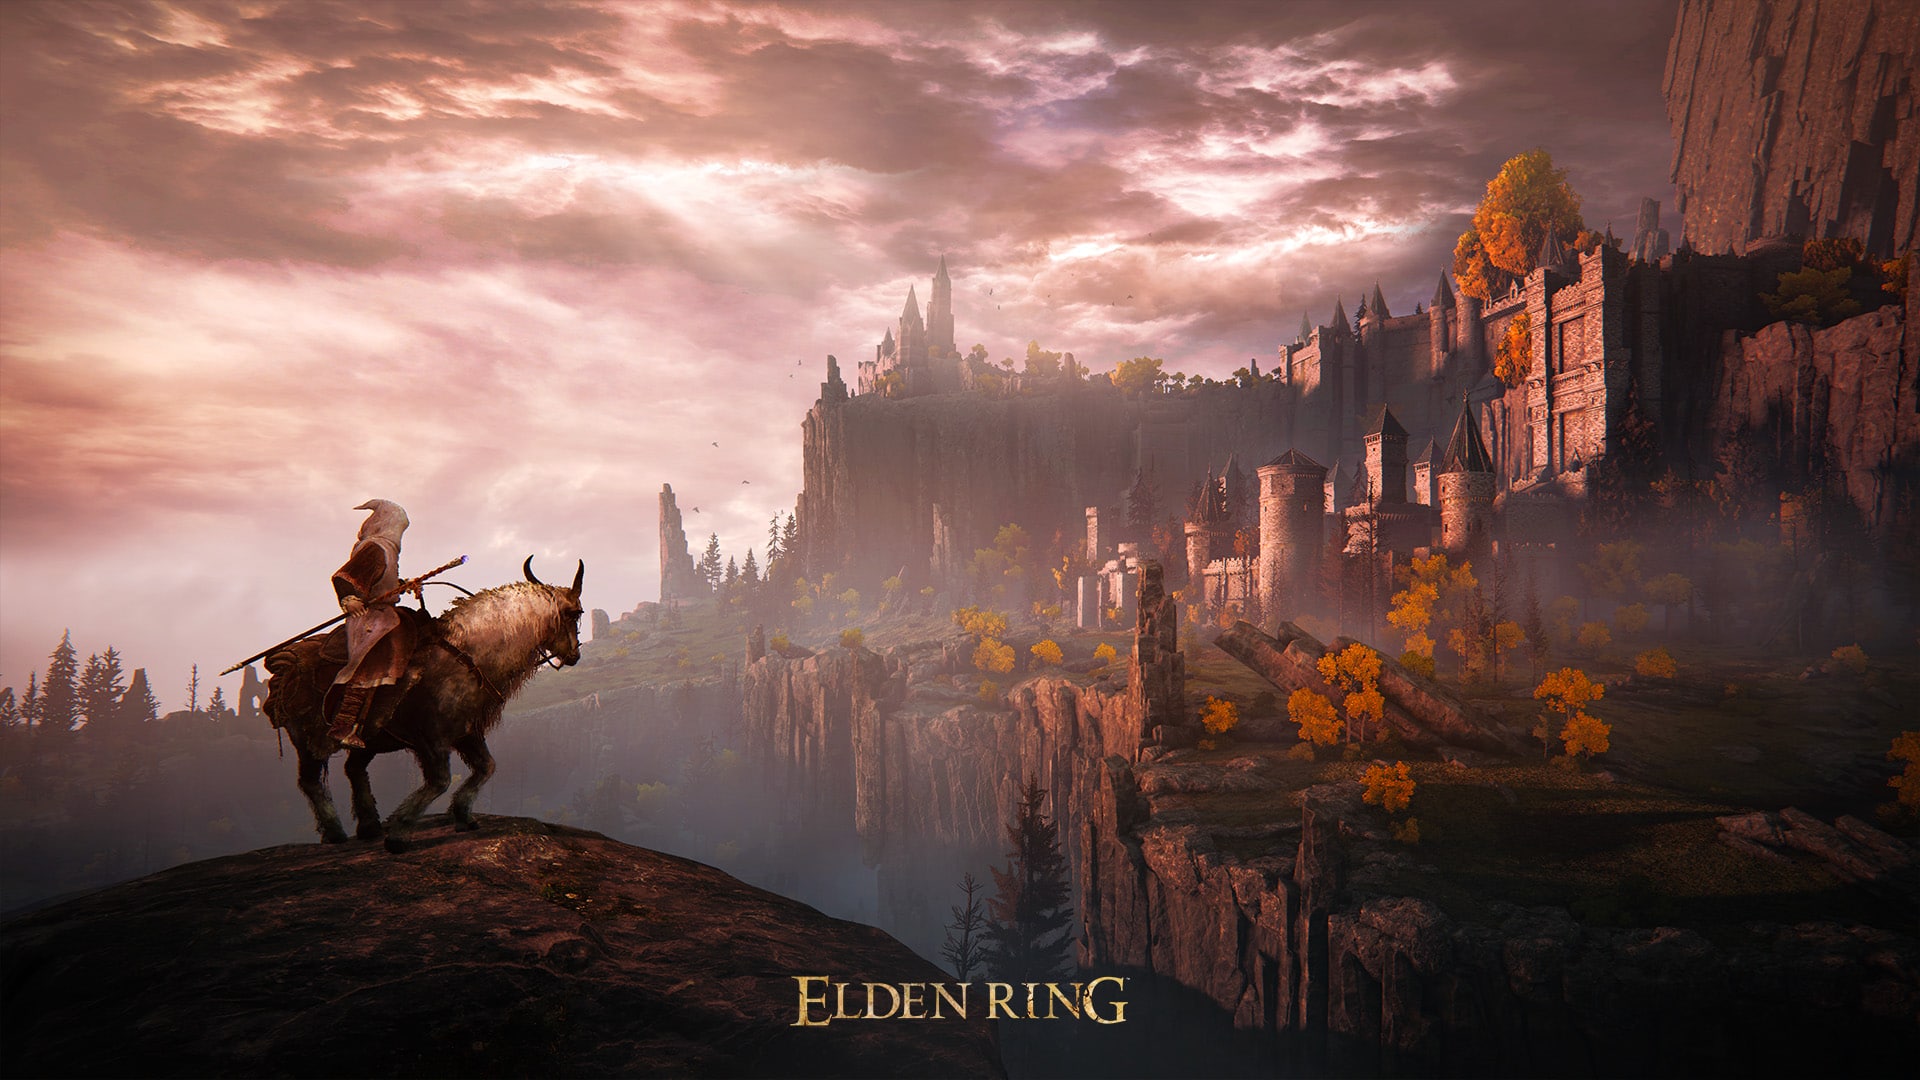 Where 'Elden Ring' Lands In The Top 20 Best Reviewed Games Of All Time